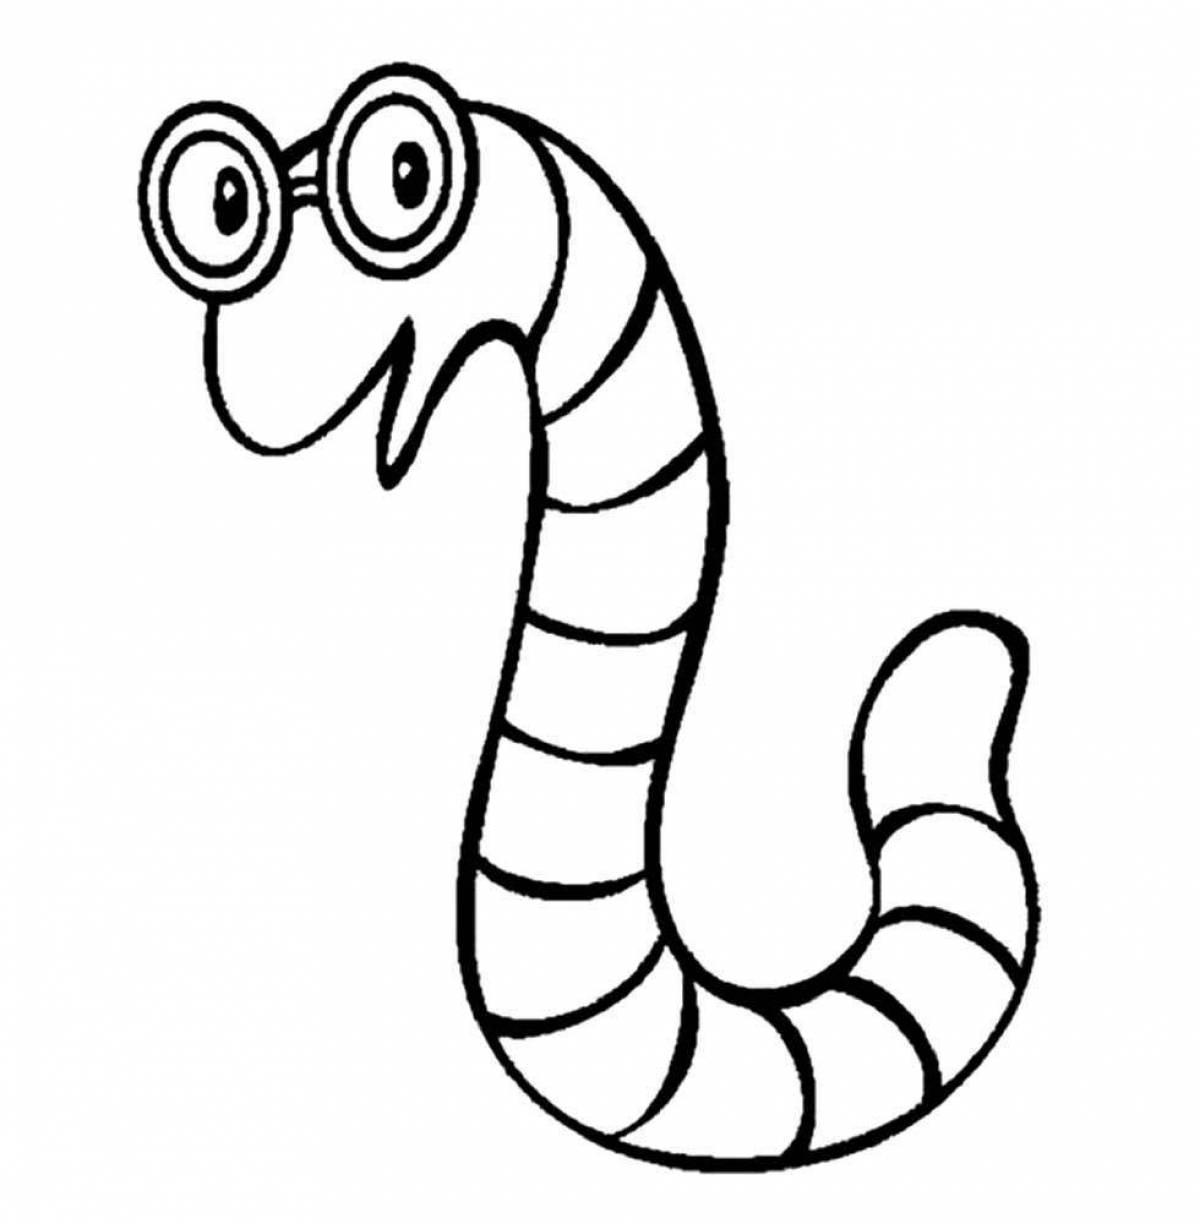 Colorful worm coloring page for kids